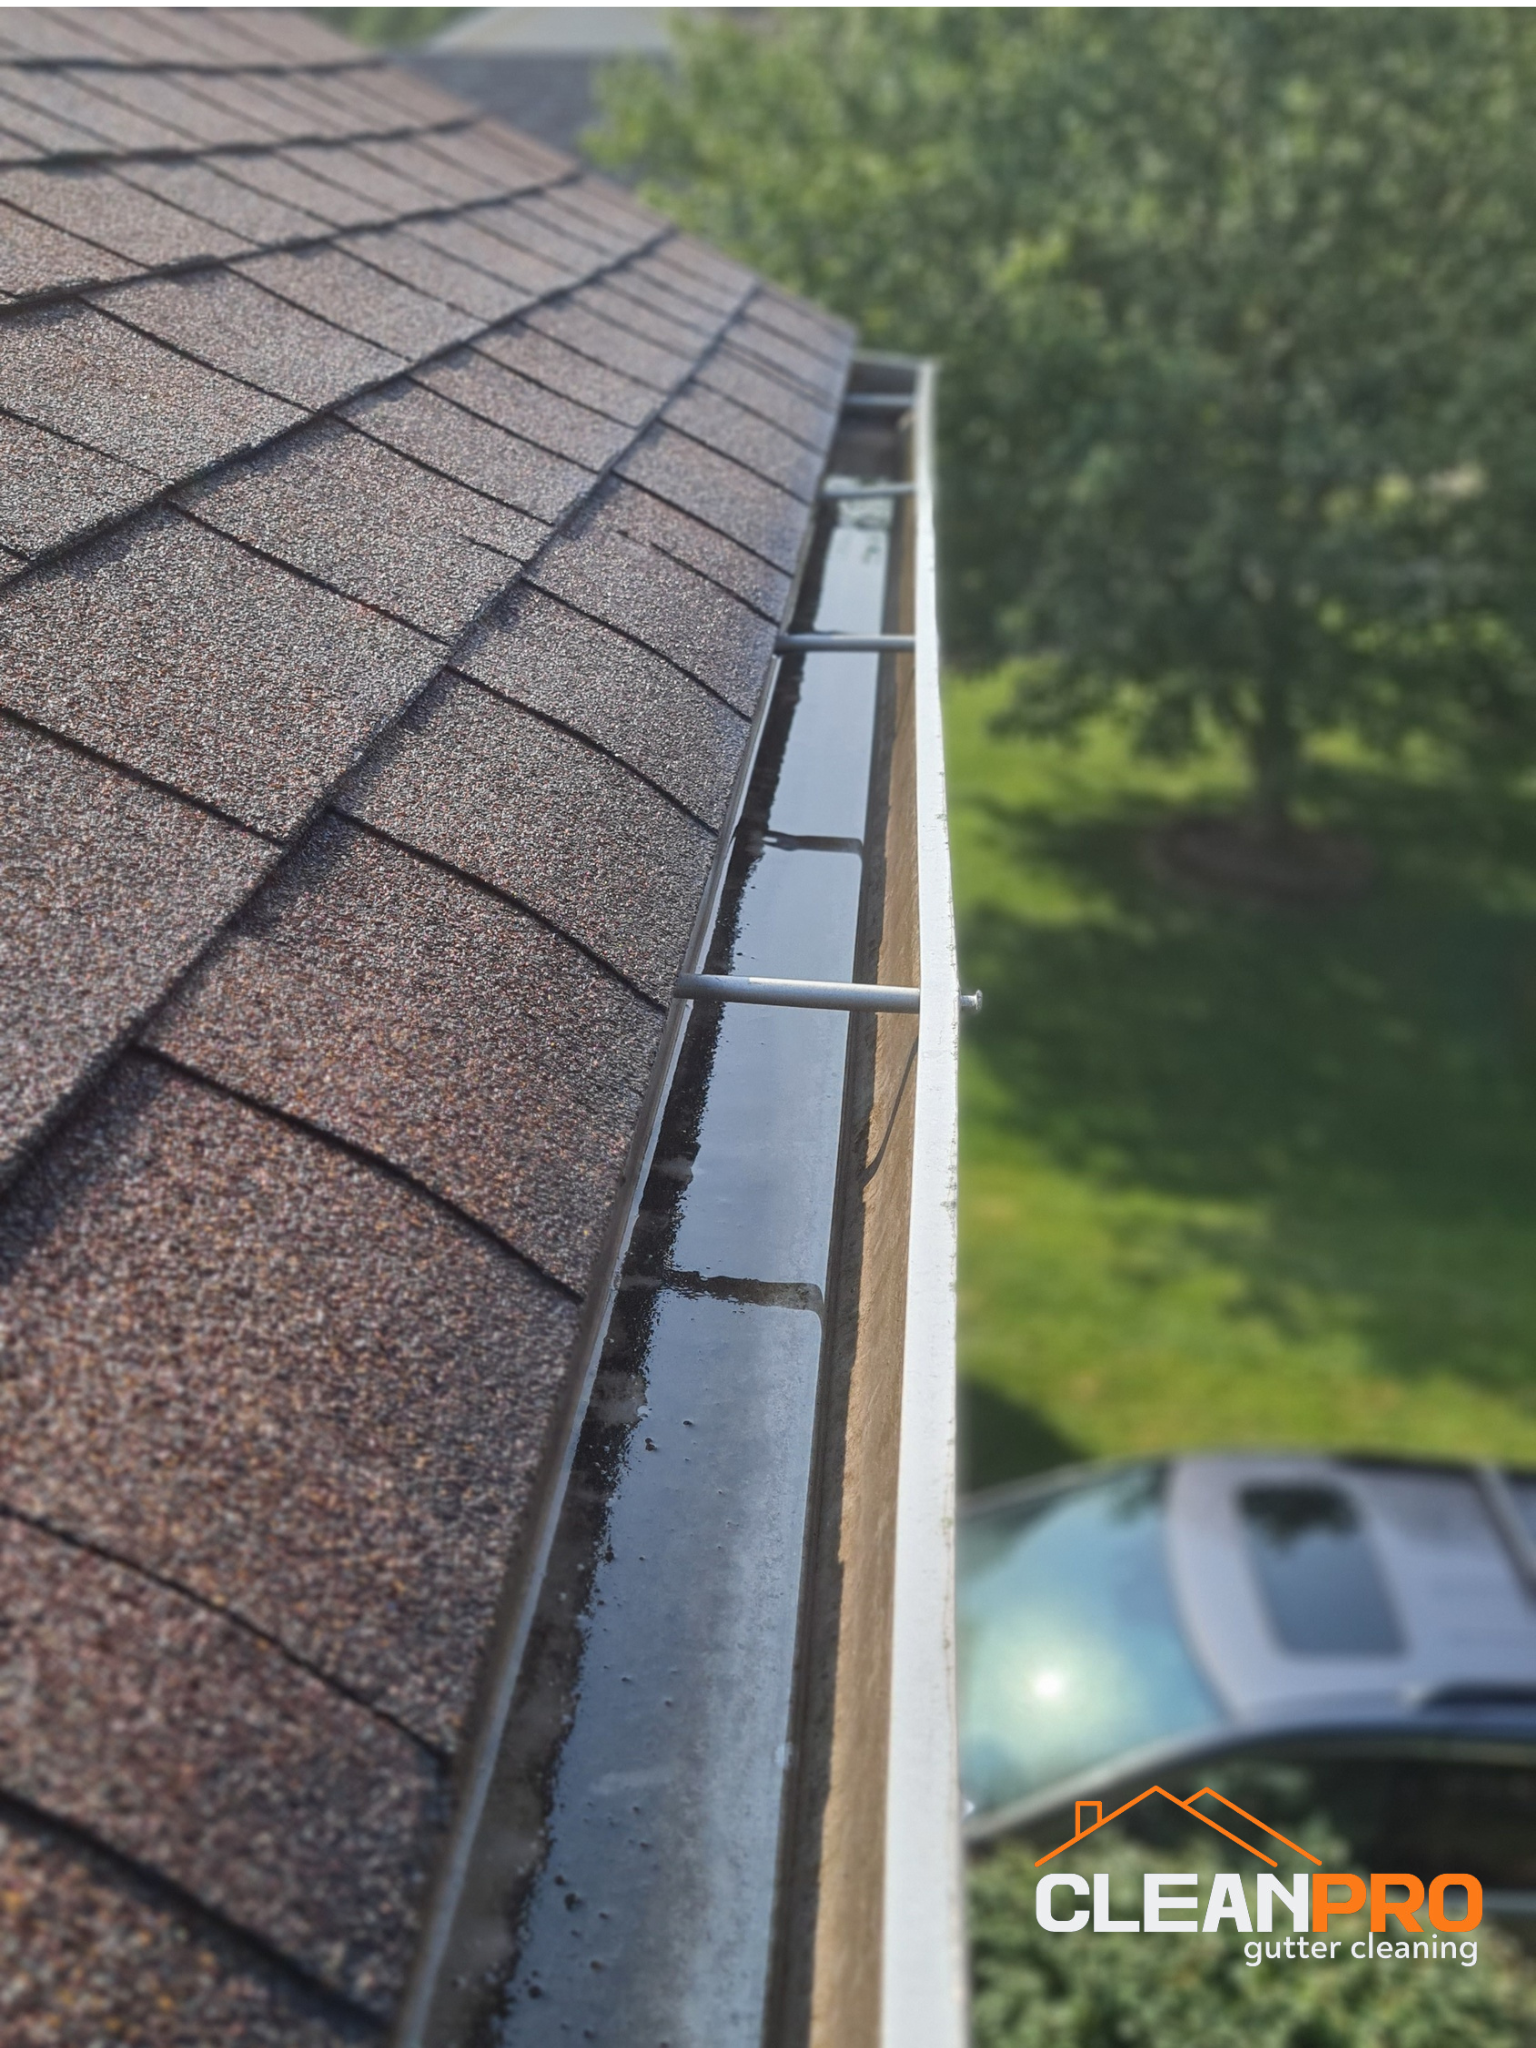 Quality Gutter Cleaning in Springfield MO